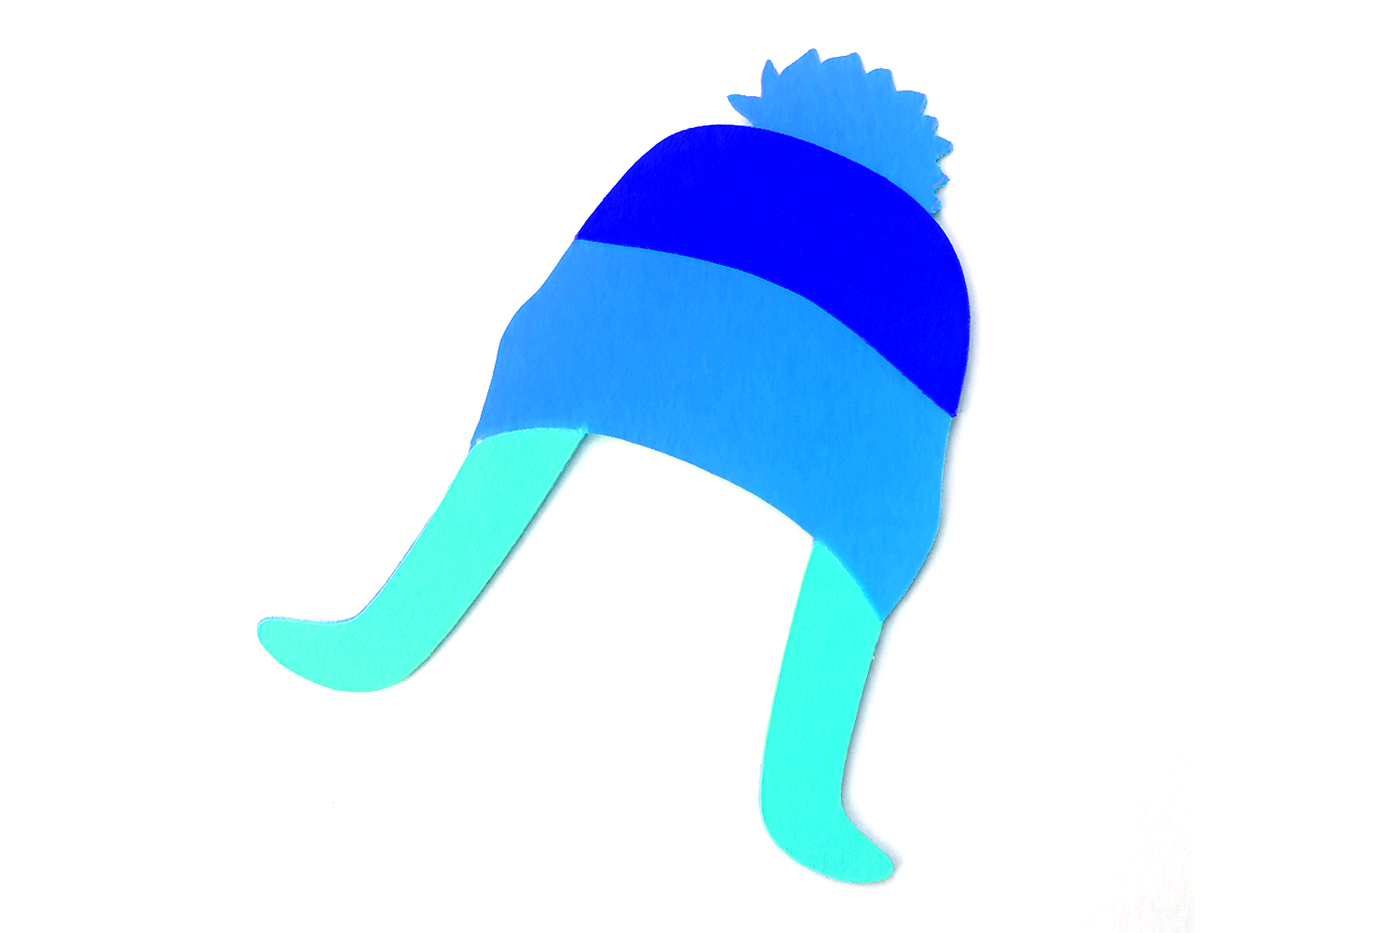 Tri-colored winter hat with flaps and a pom pom made out of paper